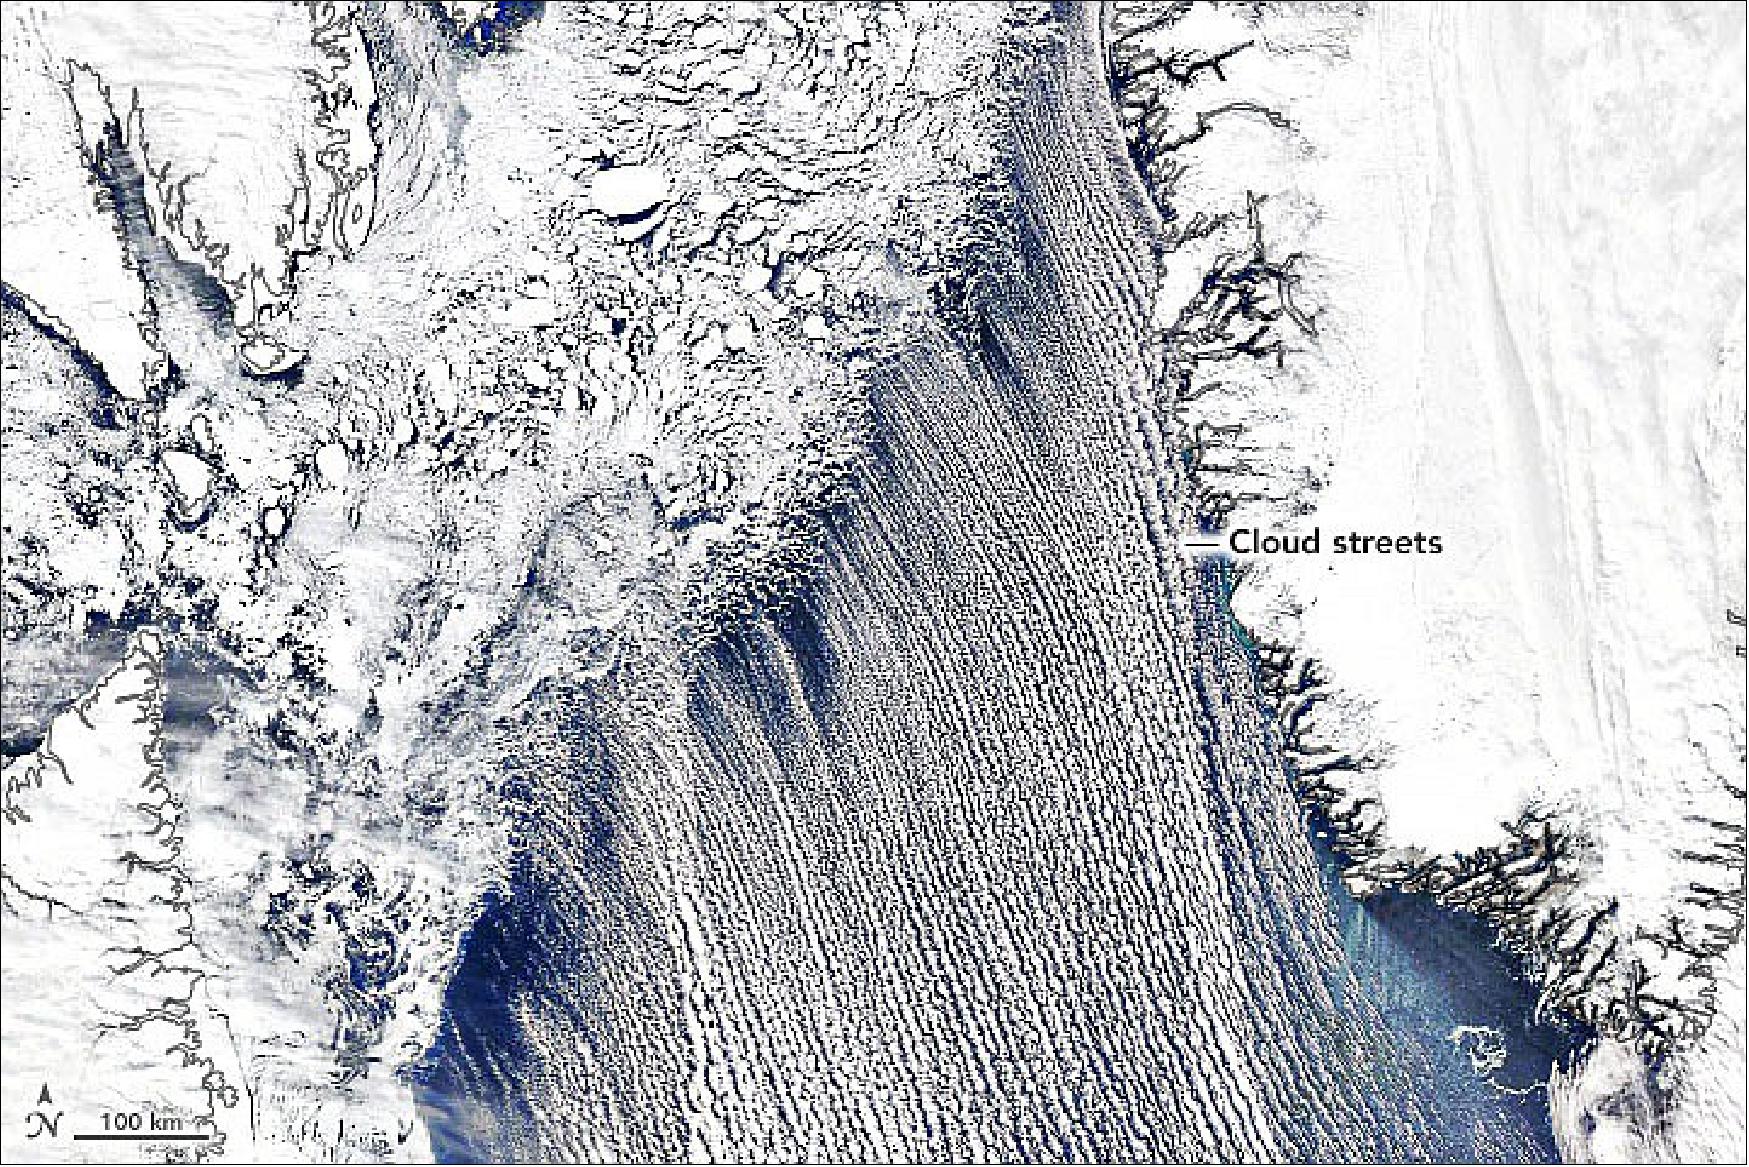 Figure 25: Strong winds stir up some compelling cloud patterns west and south of the continent. Detail image captured with the MODIS instrument on NASA’s Aqua satellite, the image shows cloud streets sweeping over the open water between Labrador, Canada, and southwest Greenland (image credit: NASA Earth Observatory images by Joshua Stevens, using MODIS data from NASA EOSDIS LANCE and GIBS/Worldview. Story by Kathryn Hansen)